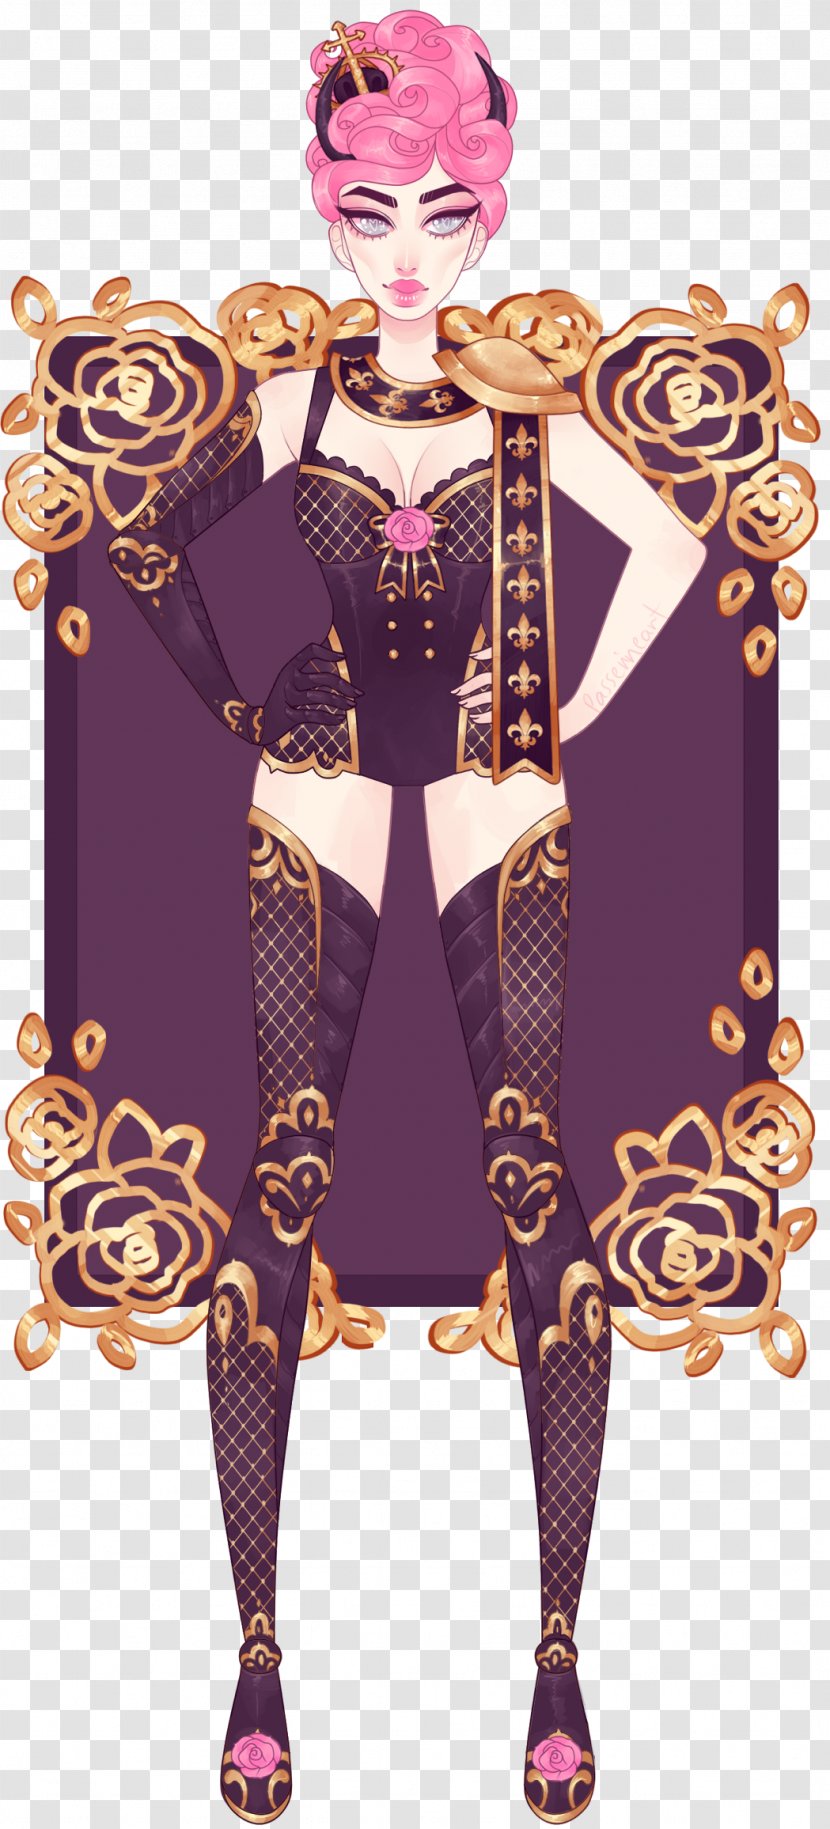 Character Fashion Design Costume - Purple - Cupid Transparent PNG